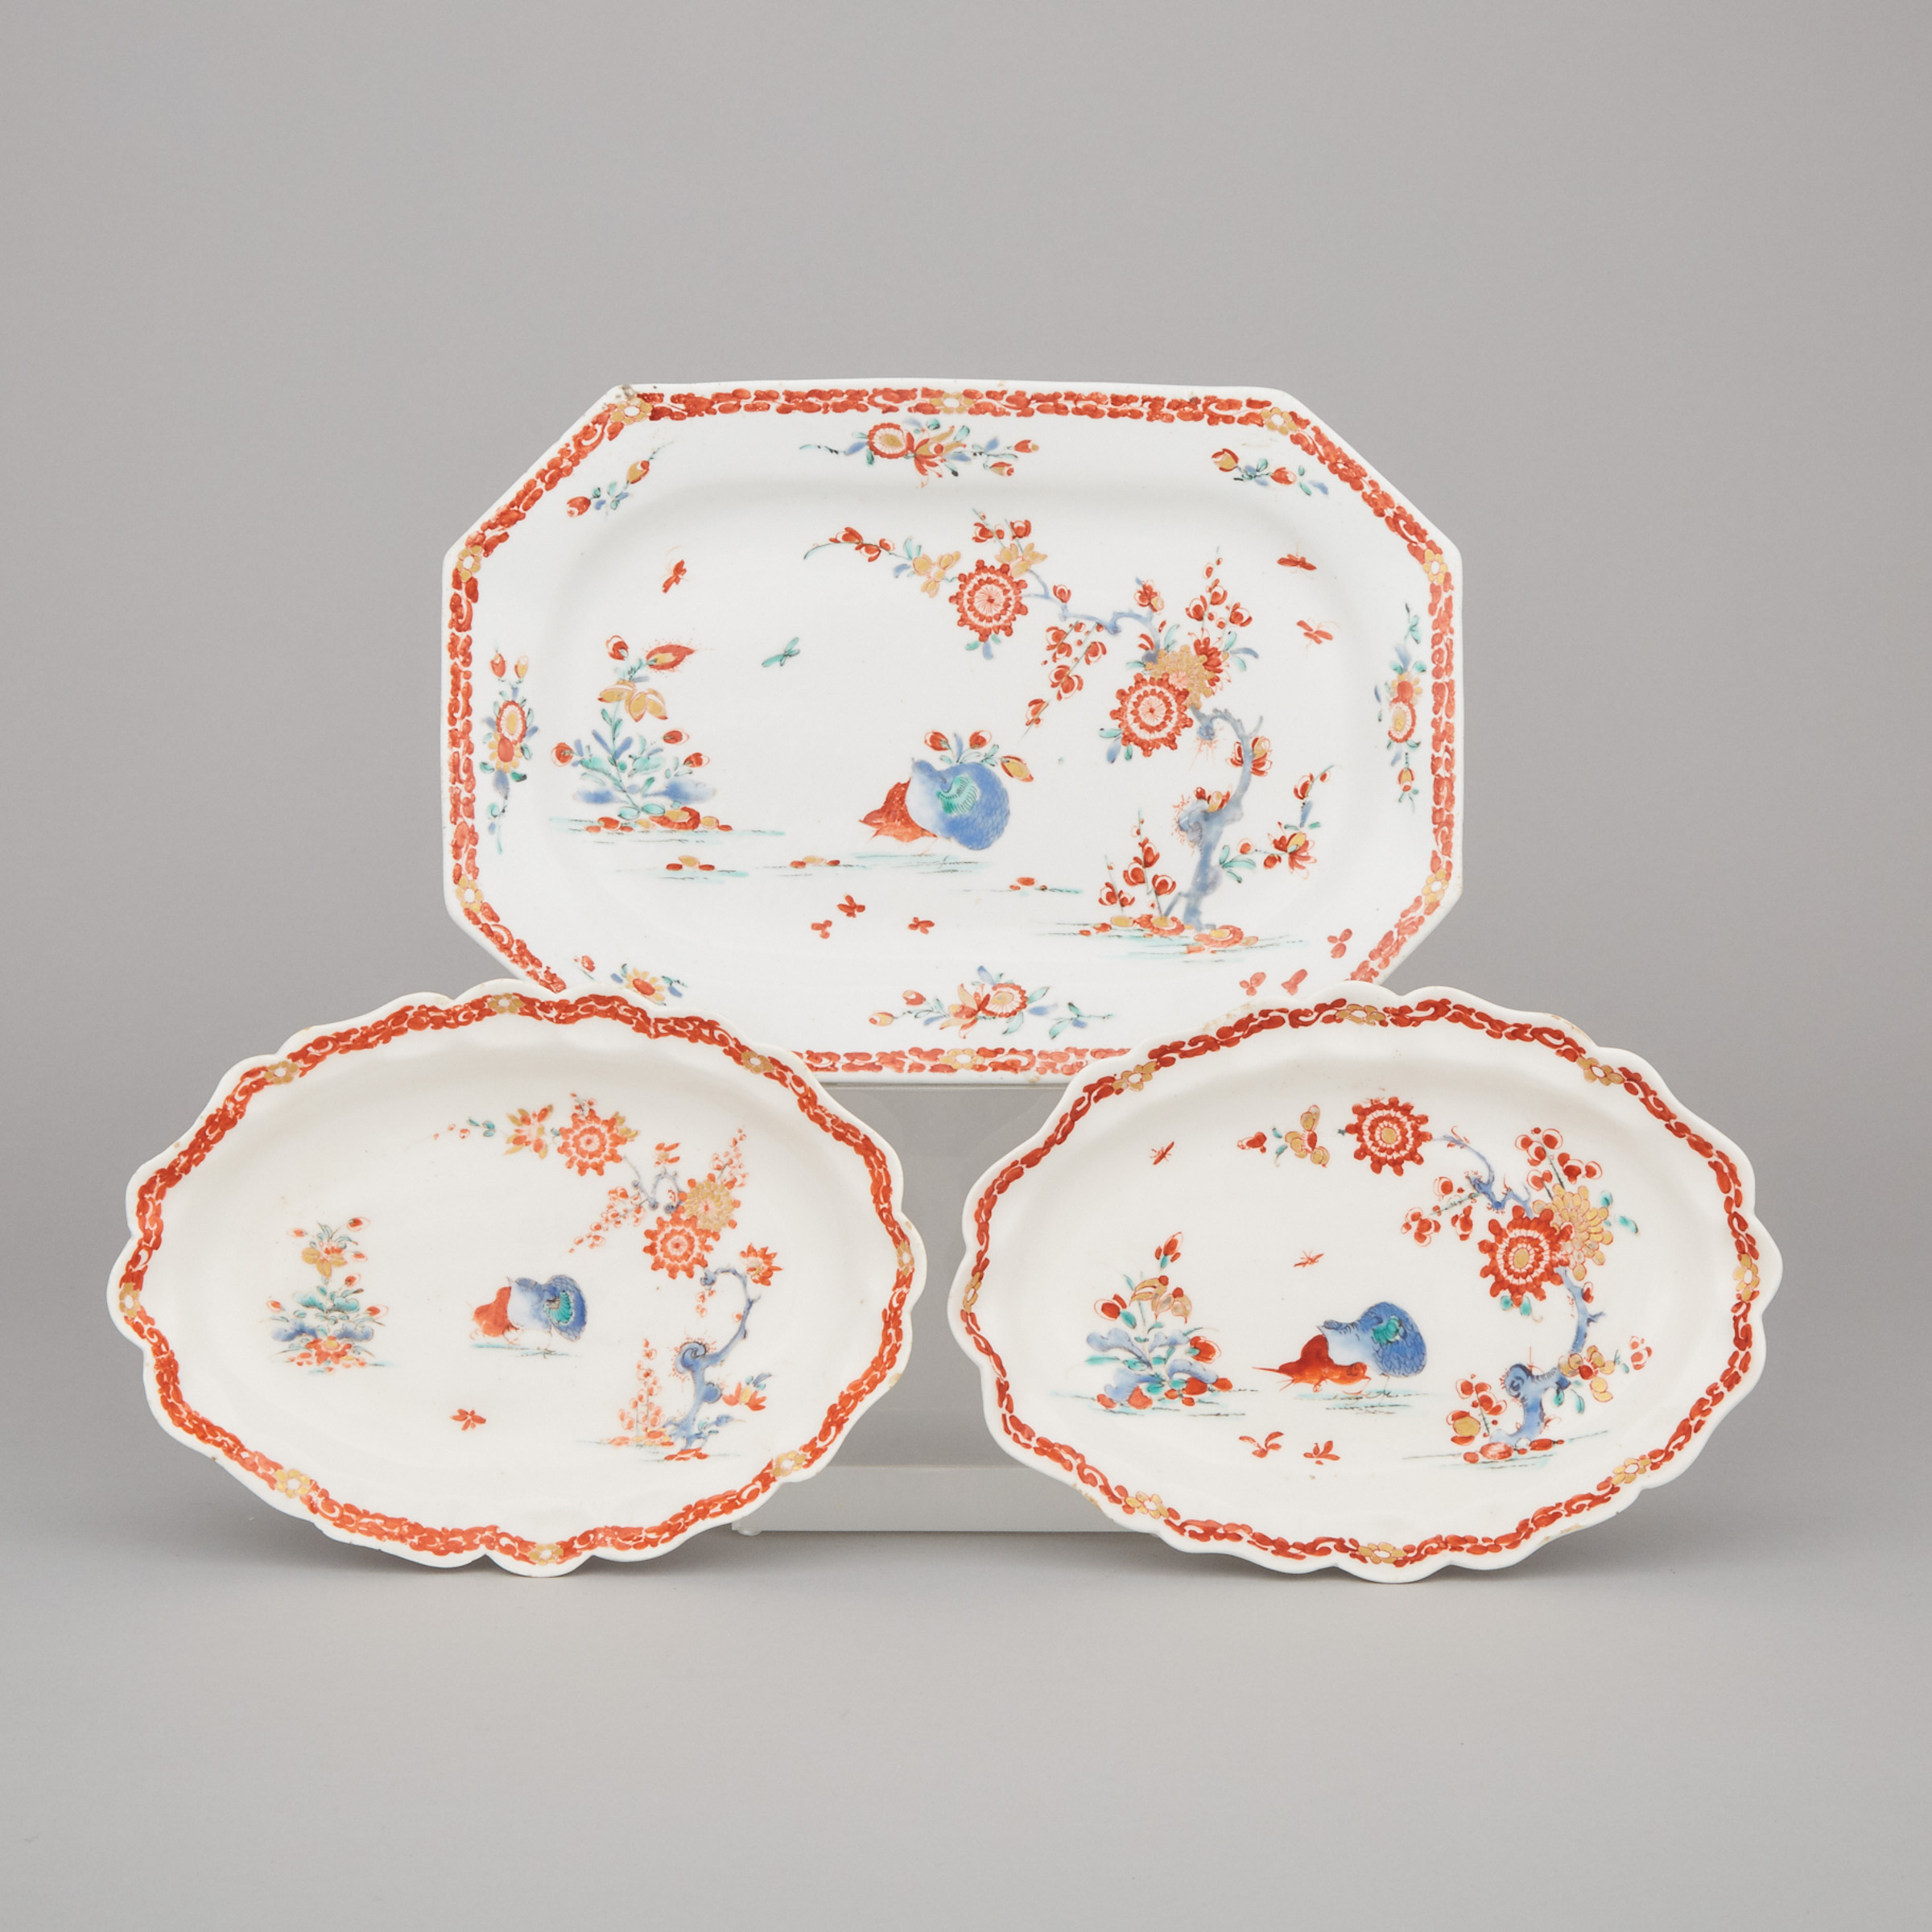 Bow Kakiemon 'Two Quail' Pattern Tray and Two Small Dishes, c.1760